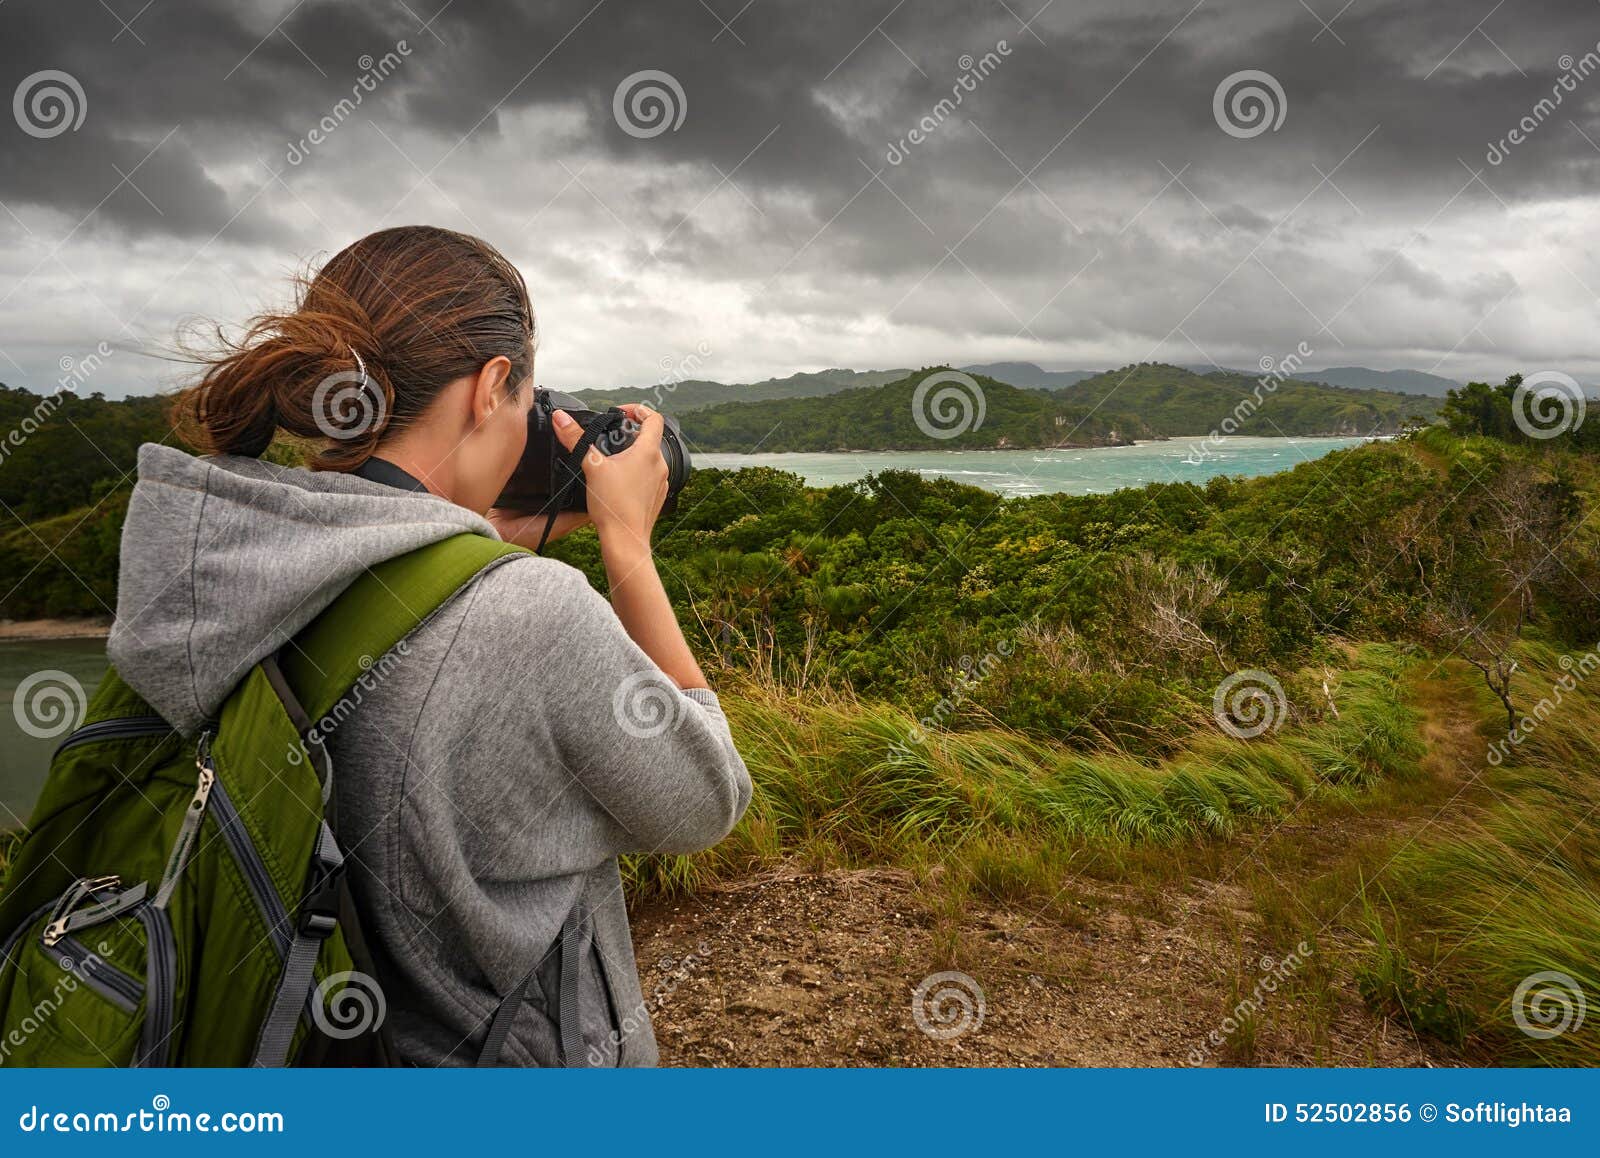 travelling woman photographer with backpack